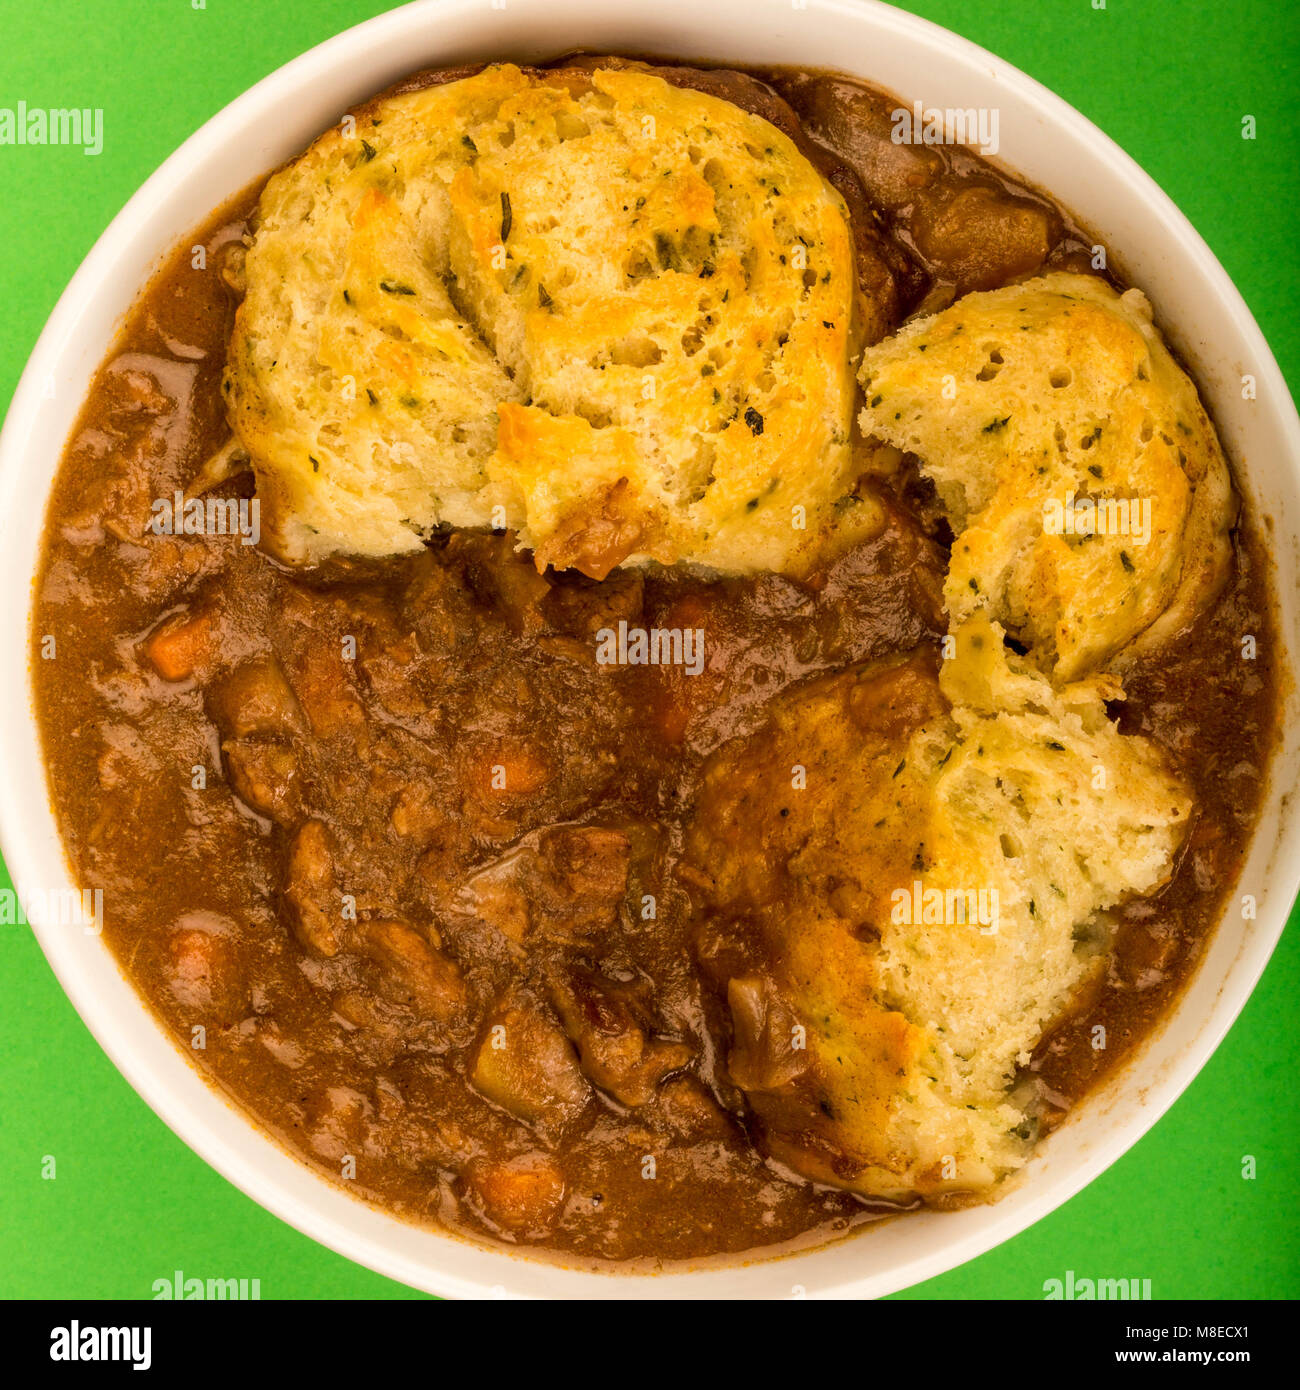 Traditional British Beef Casserole With Dumplings Against A Green Background Stock Photo